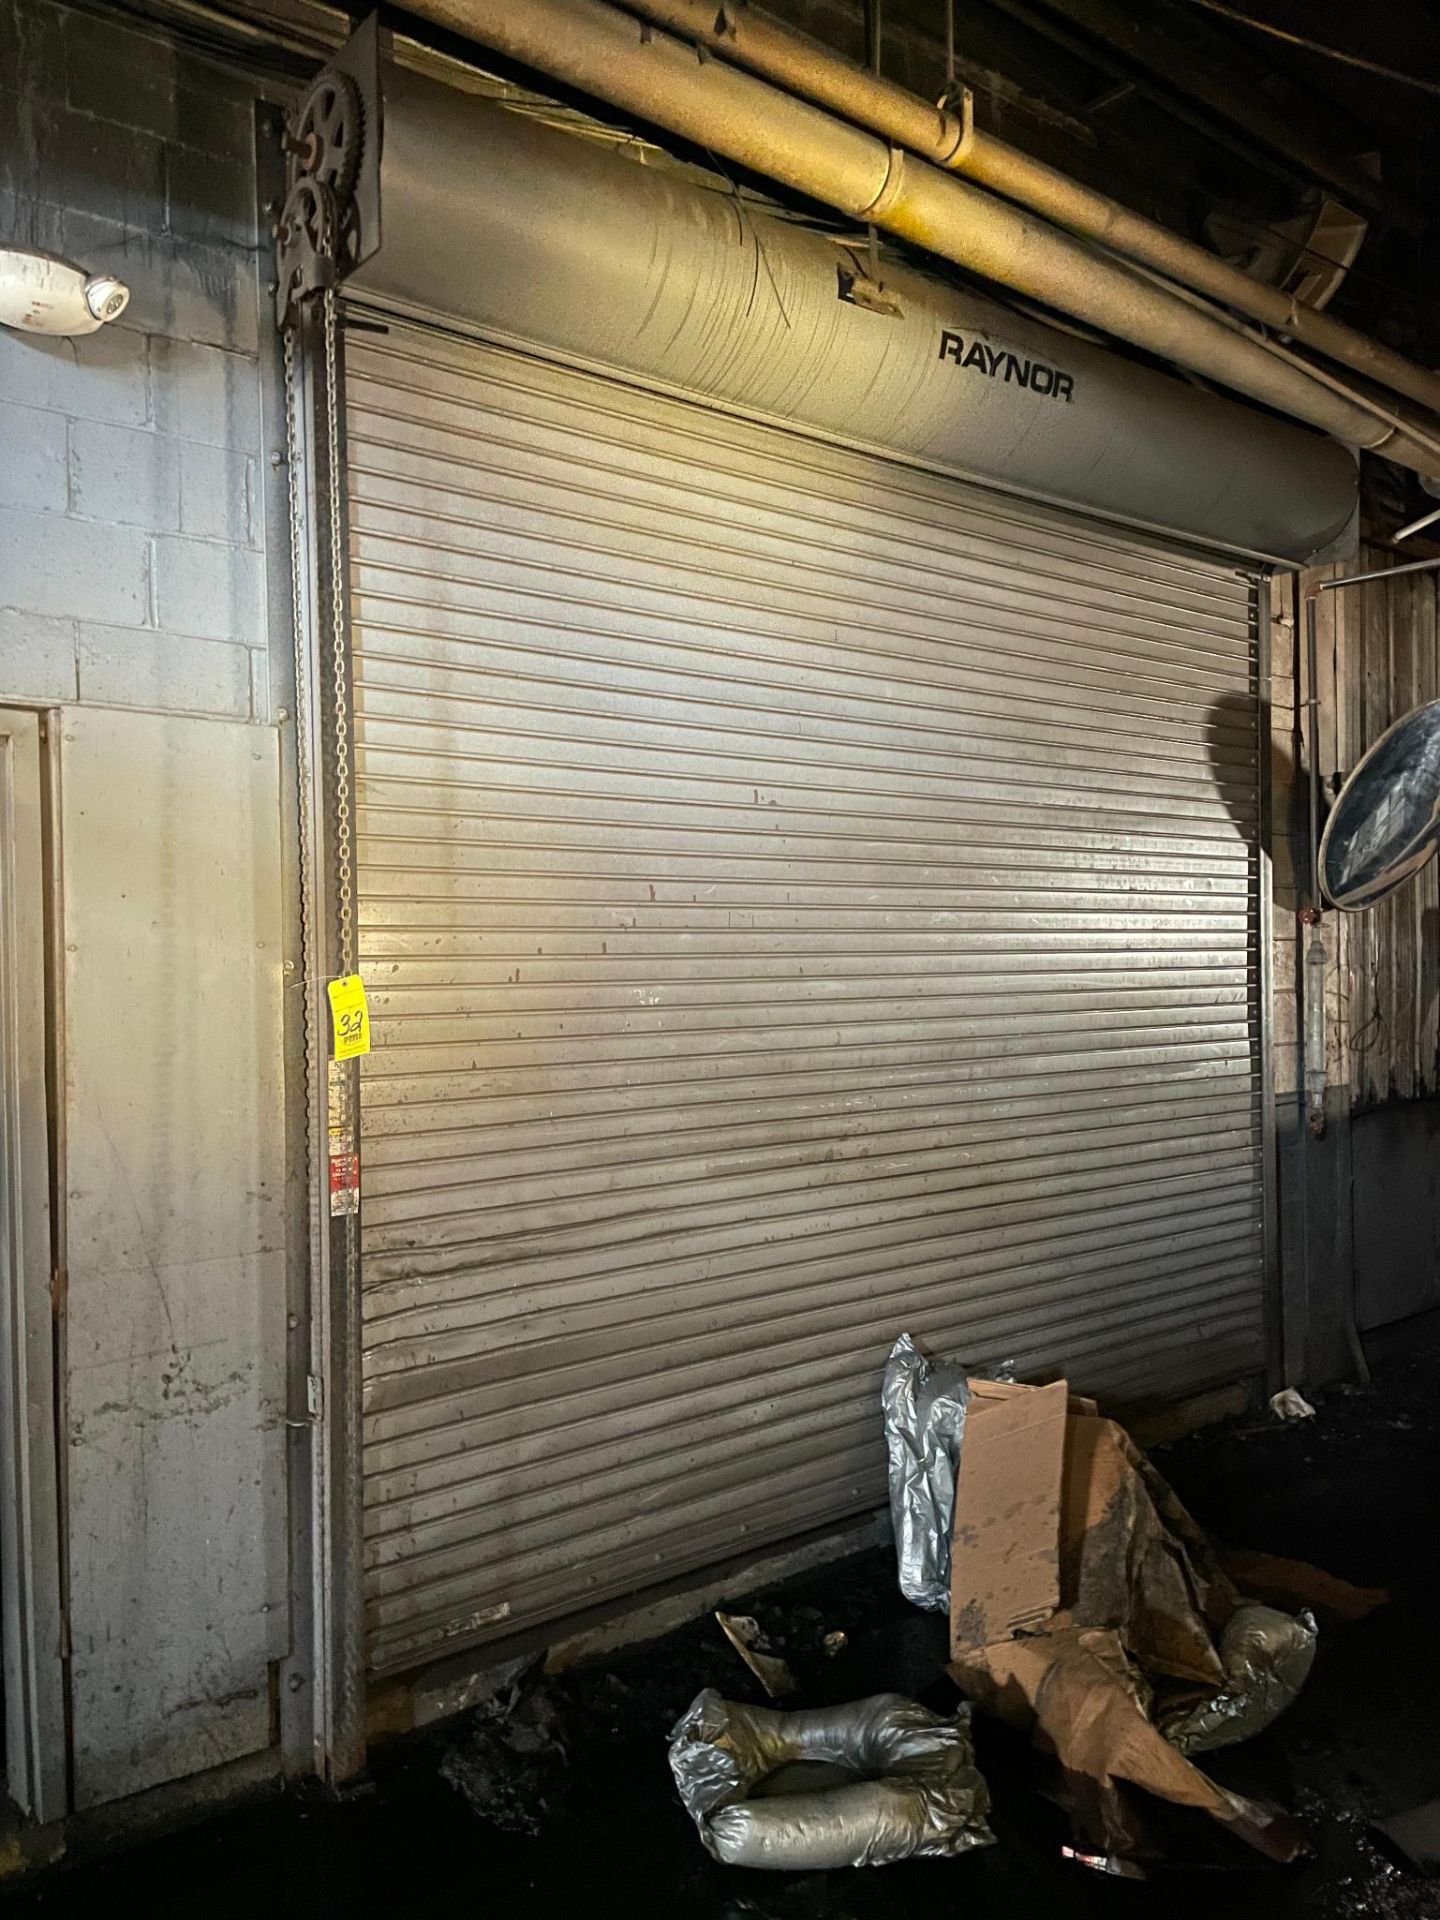 ROLL-UP DOOR, RAYNOR, manual closure, approx. 12'H. x 14'W.